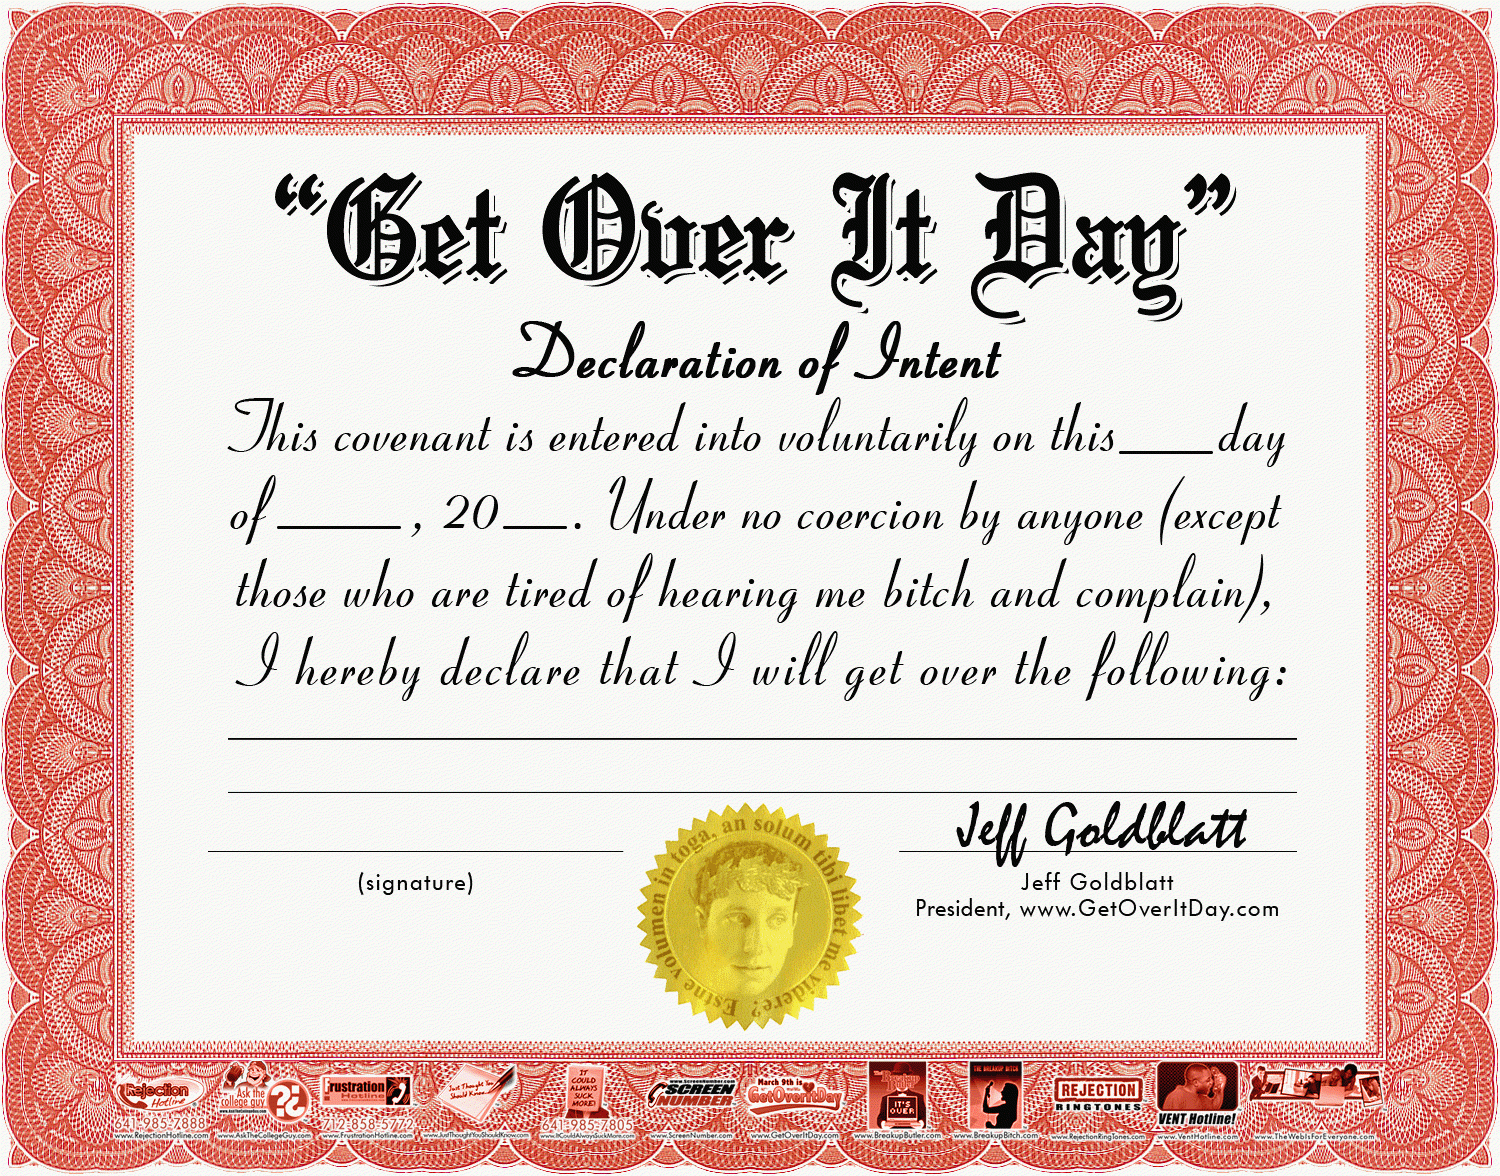 Funny Office Awards Youtube. Silly Certificates Funny Awards Within Funny Certificate Templates